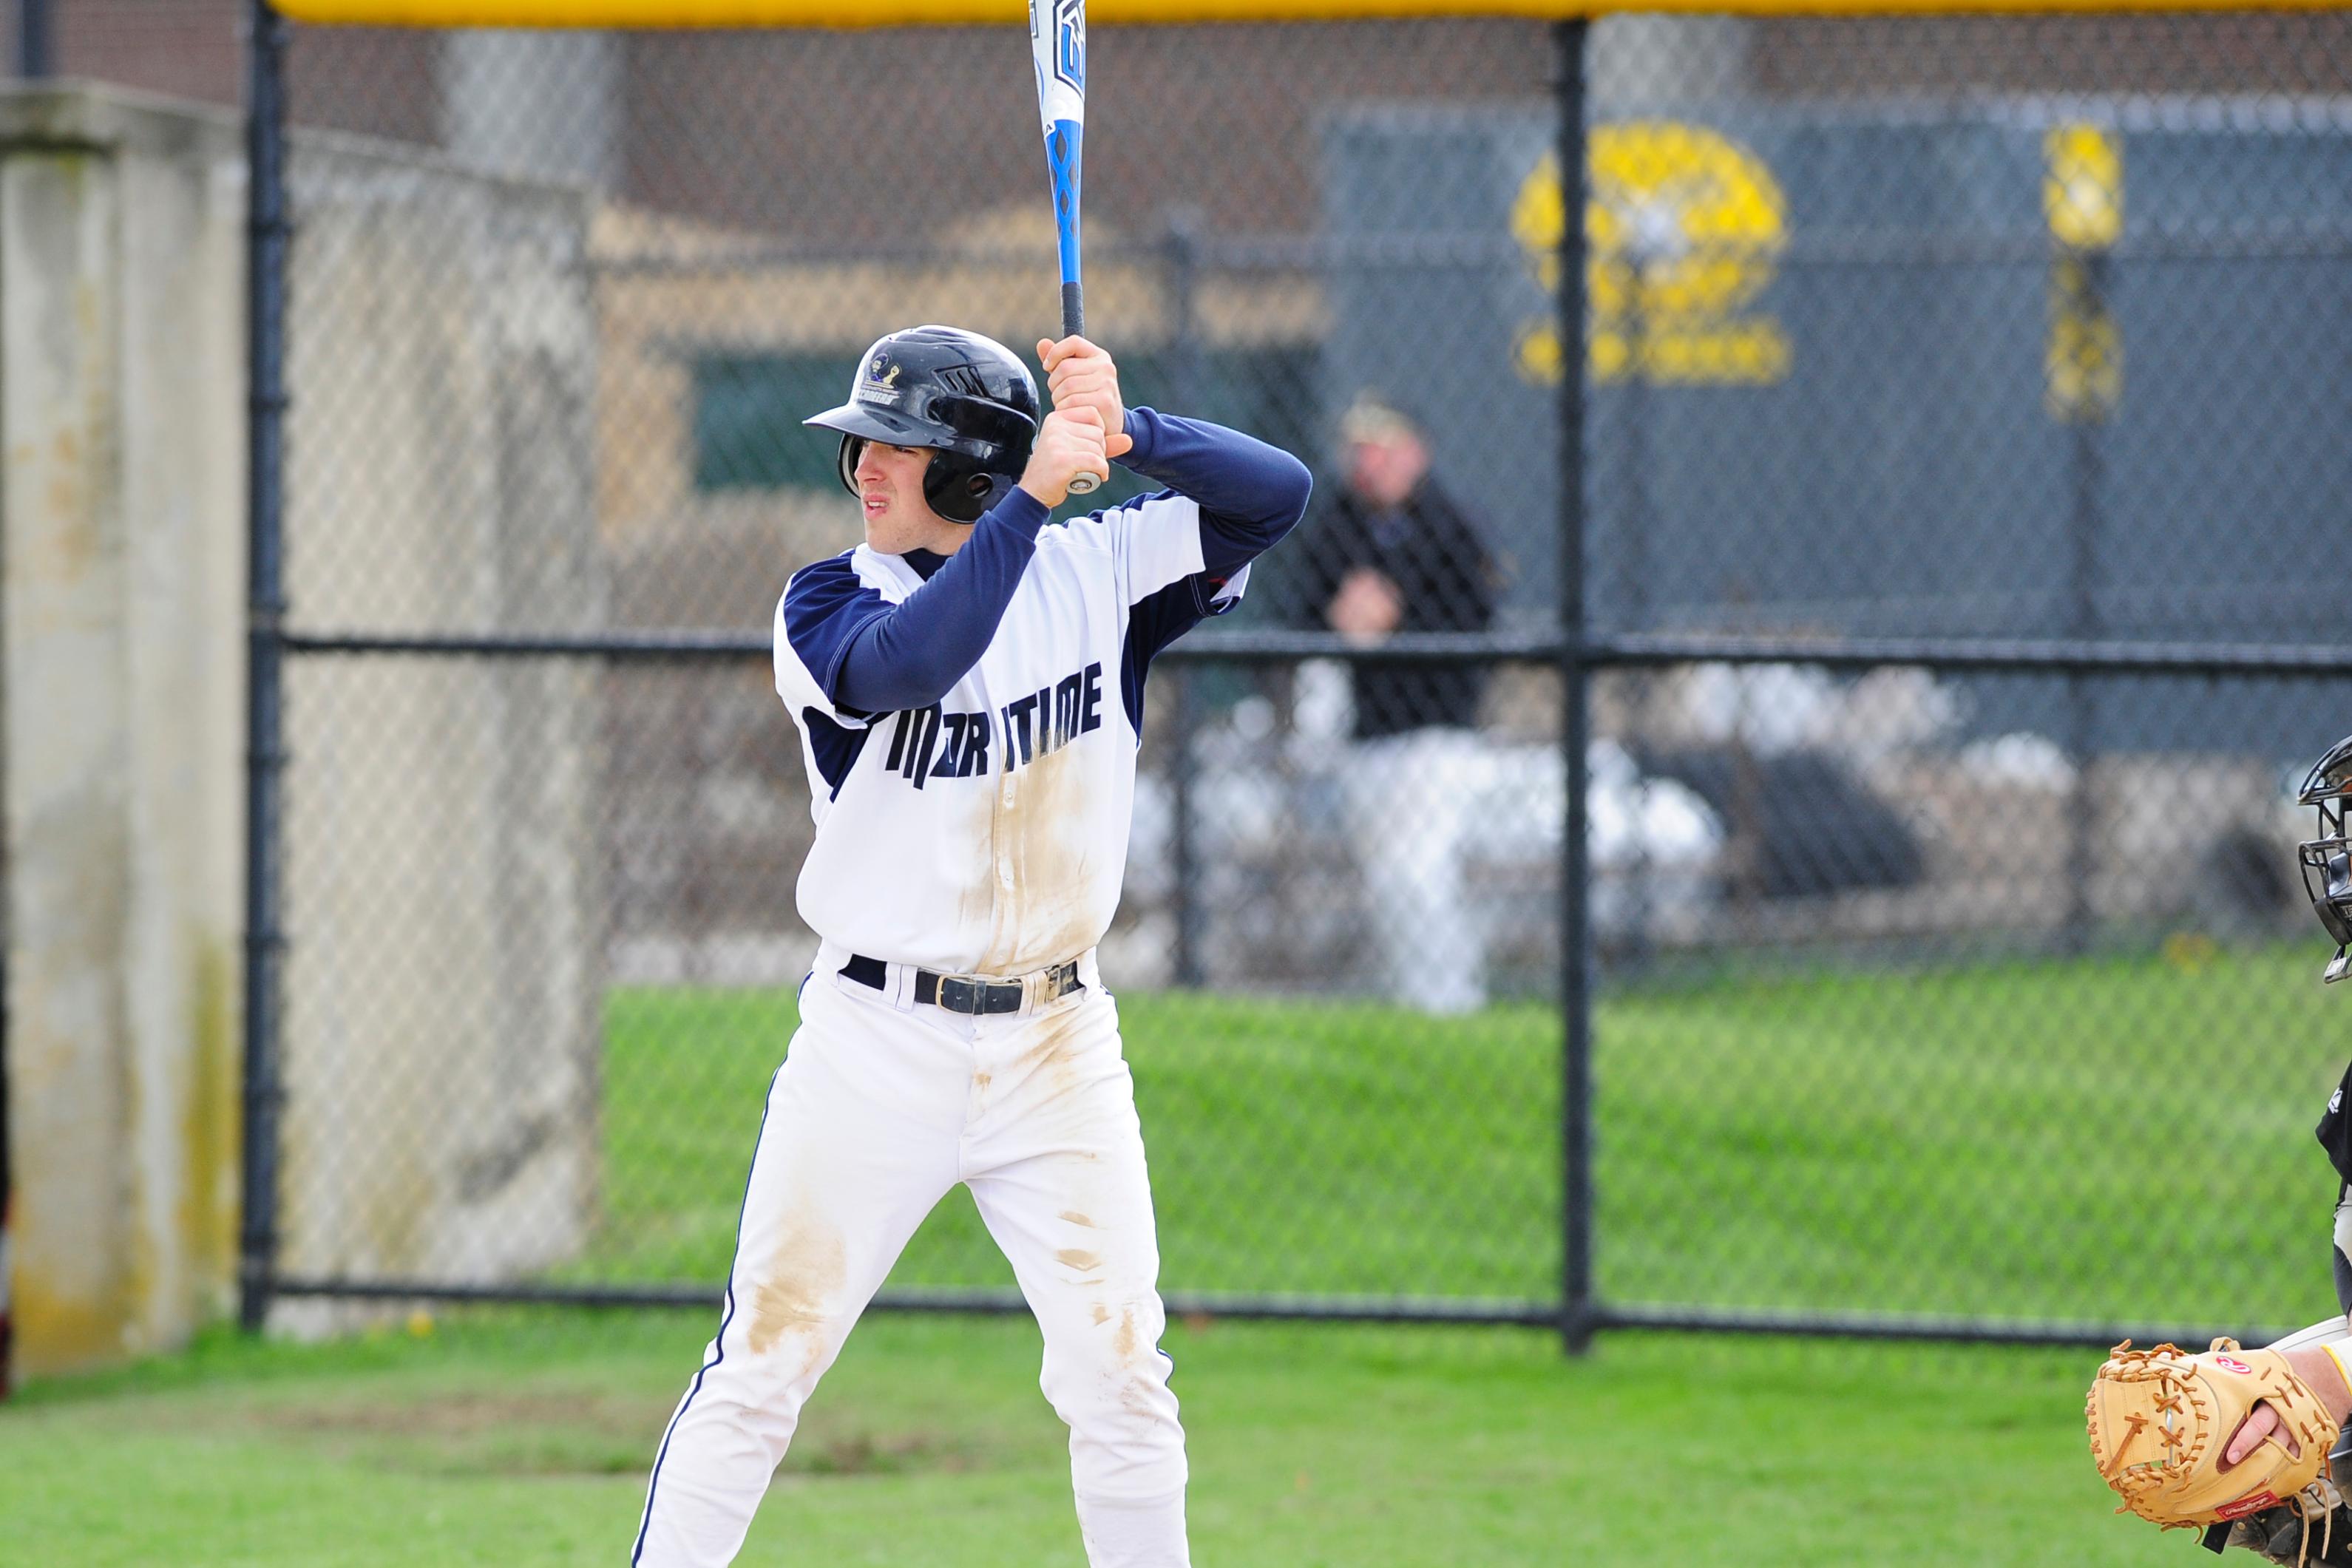 Hickey, Sullivan Drive In Runs As Baseball Drops 5-3 Rain Shortened Outing To Wentworth